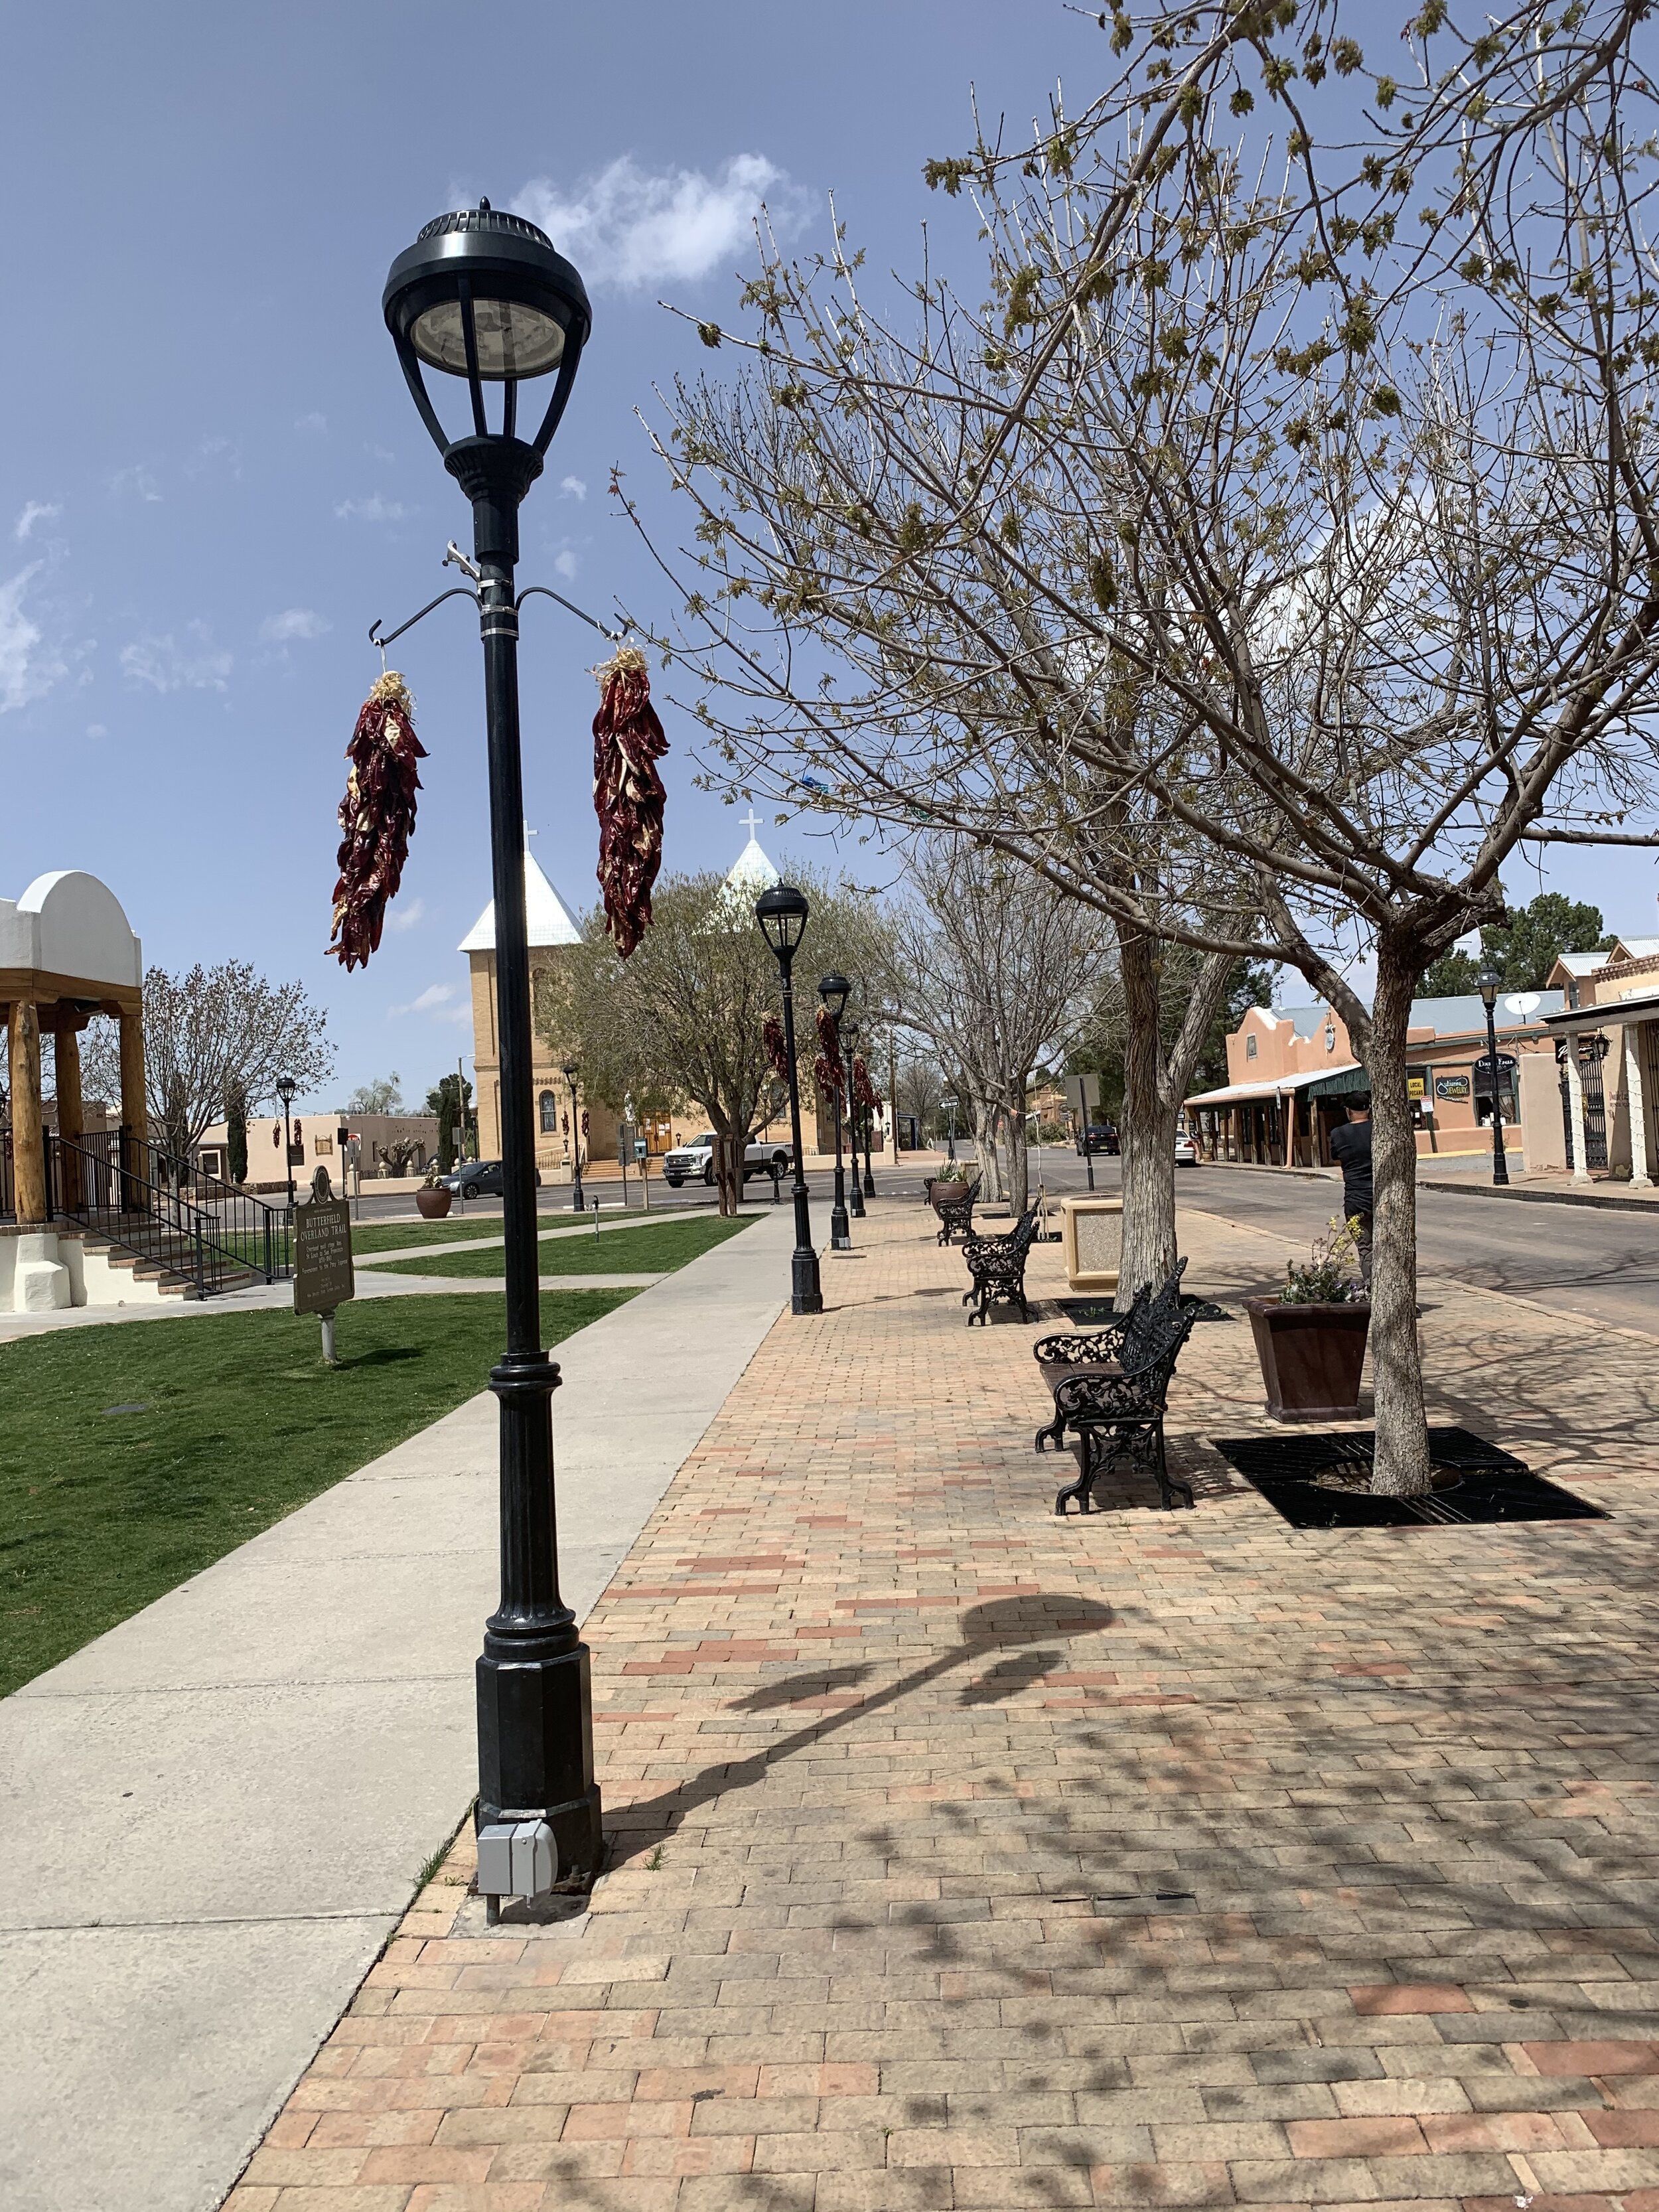  Mesilla became a part of the United States in 1854 as part of the Gadsden Treaty, in which the US paid 10 million dollars for 29,000 square miles of Mexico that would later become parts of Arizona and New Mexico. The US wanted this land so they coul